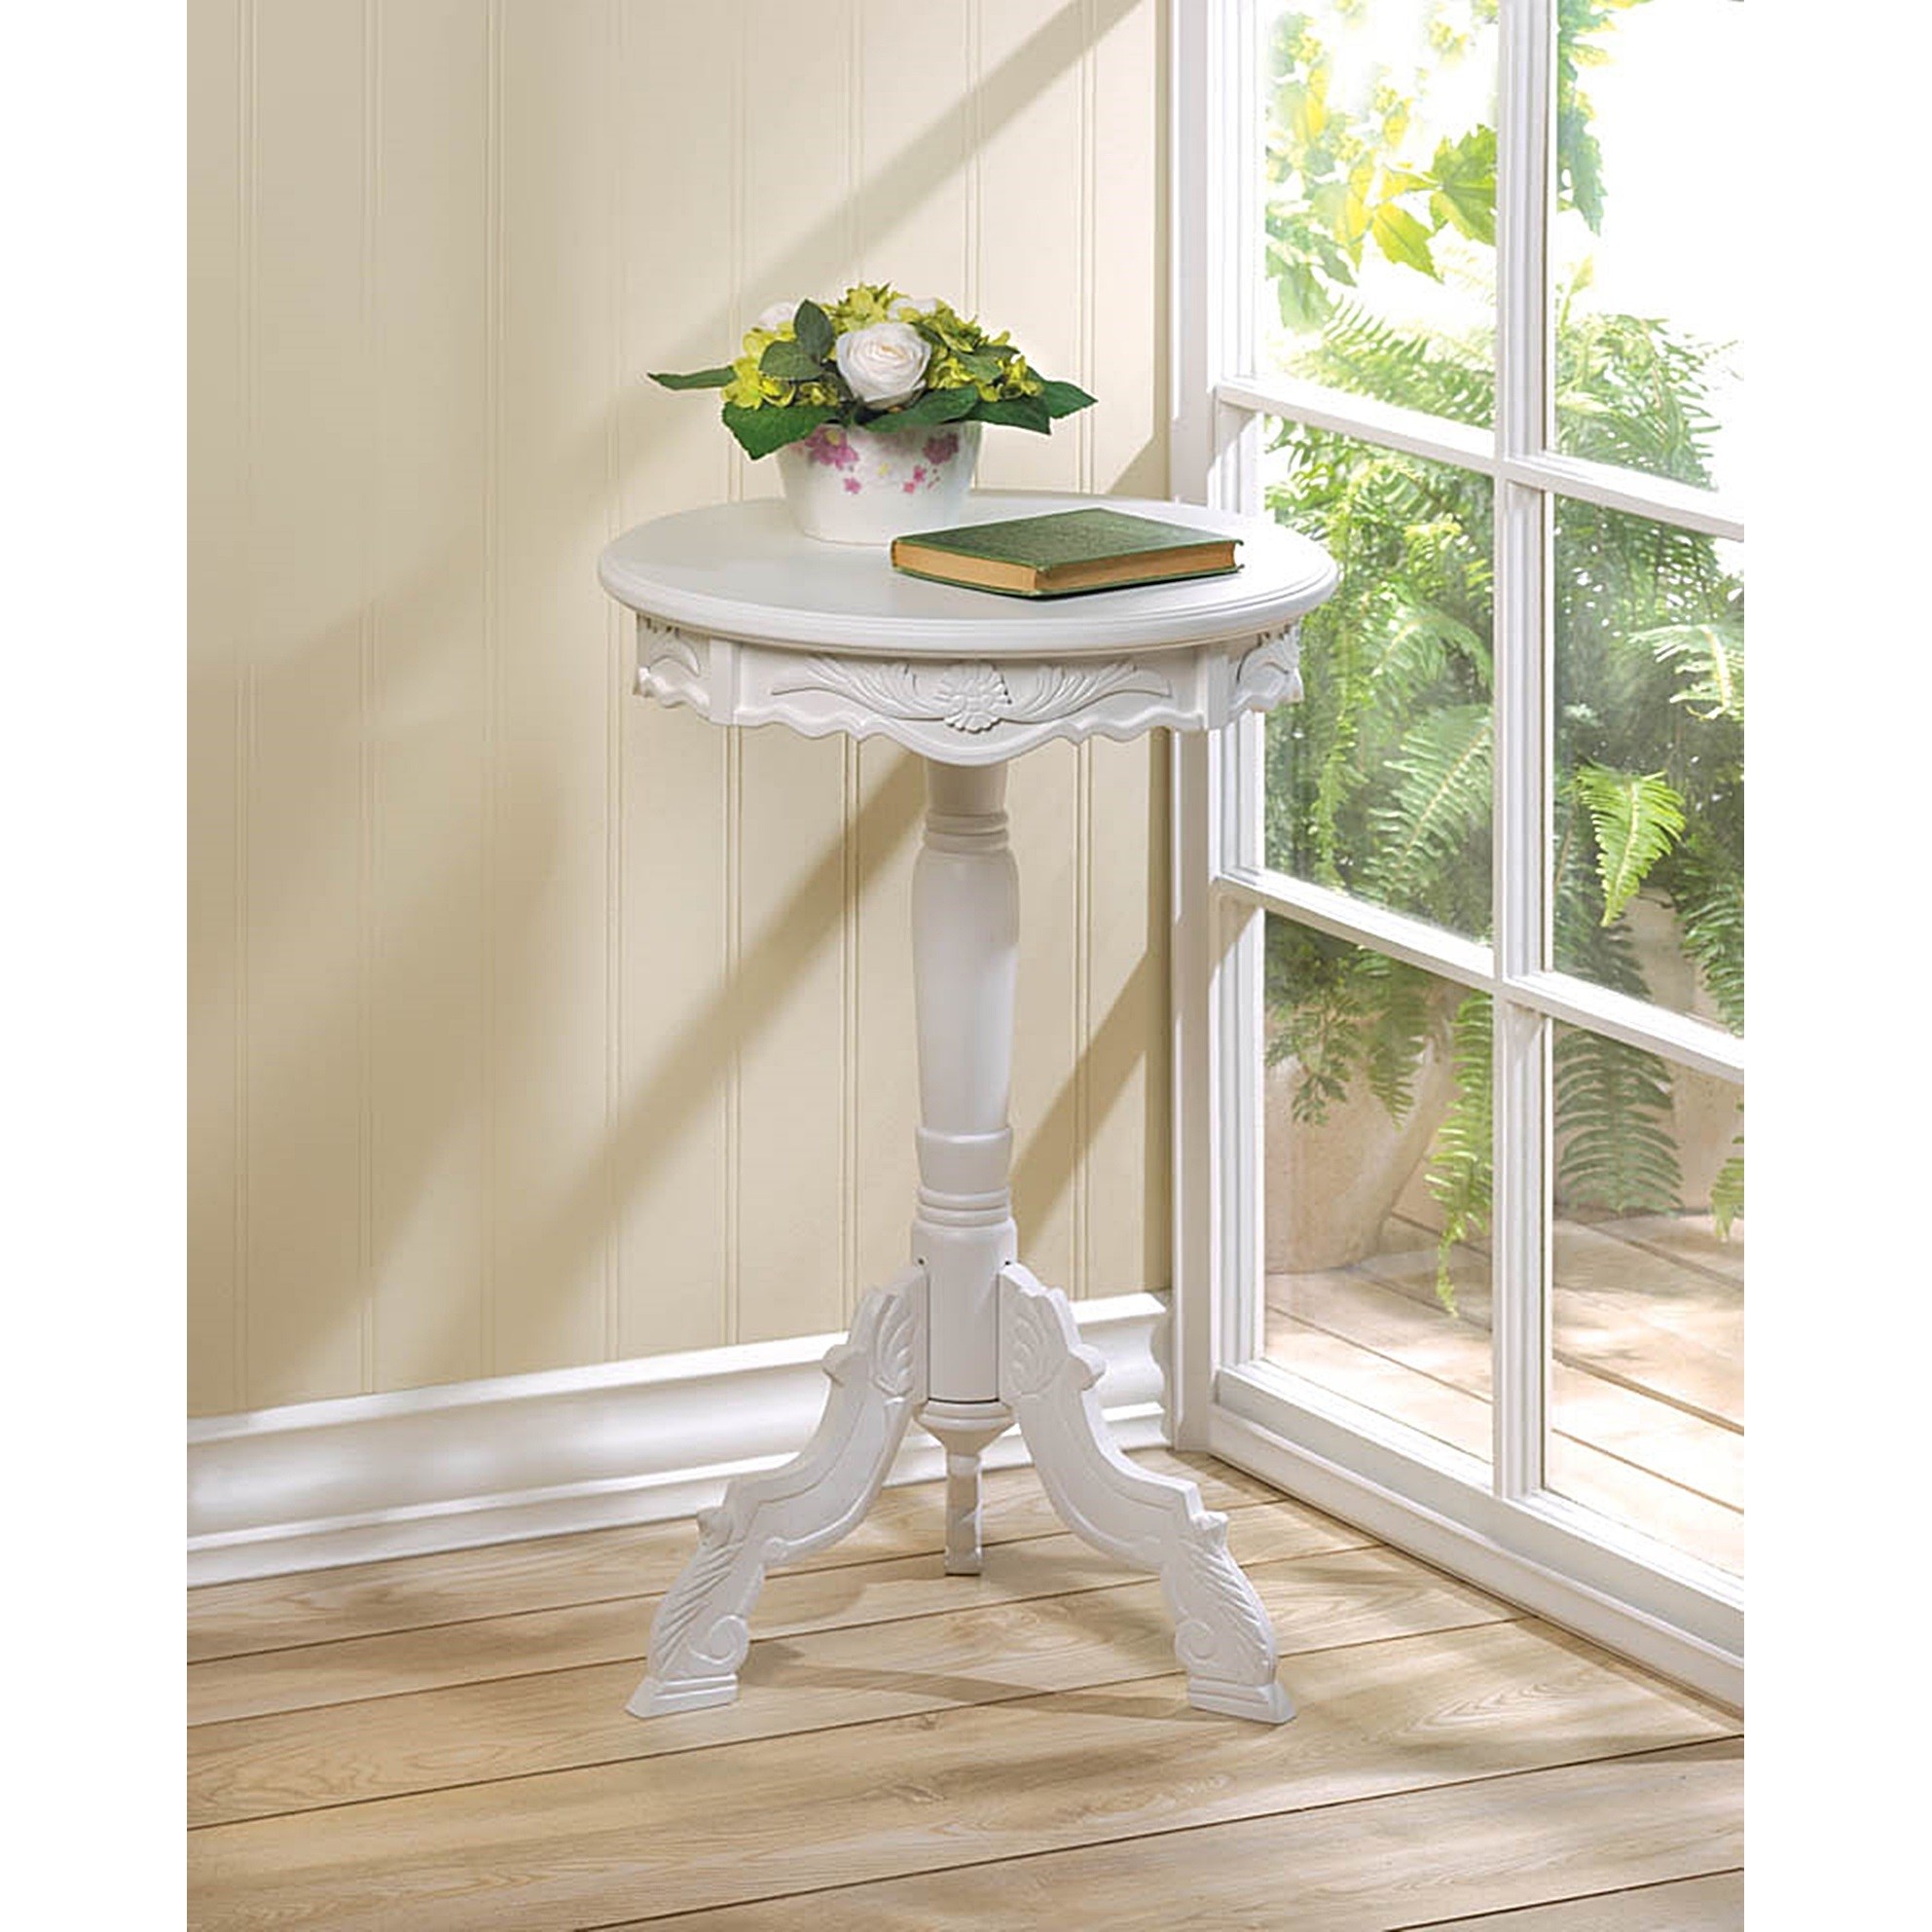 antigue white antique style wooden round mini accent table free shipping today bedroom chairs target ethan allen occasional tables build your own end chrome and glass cream chair